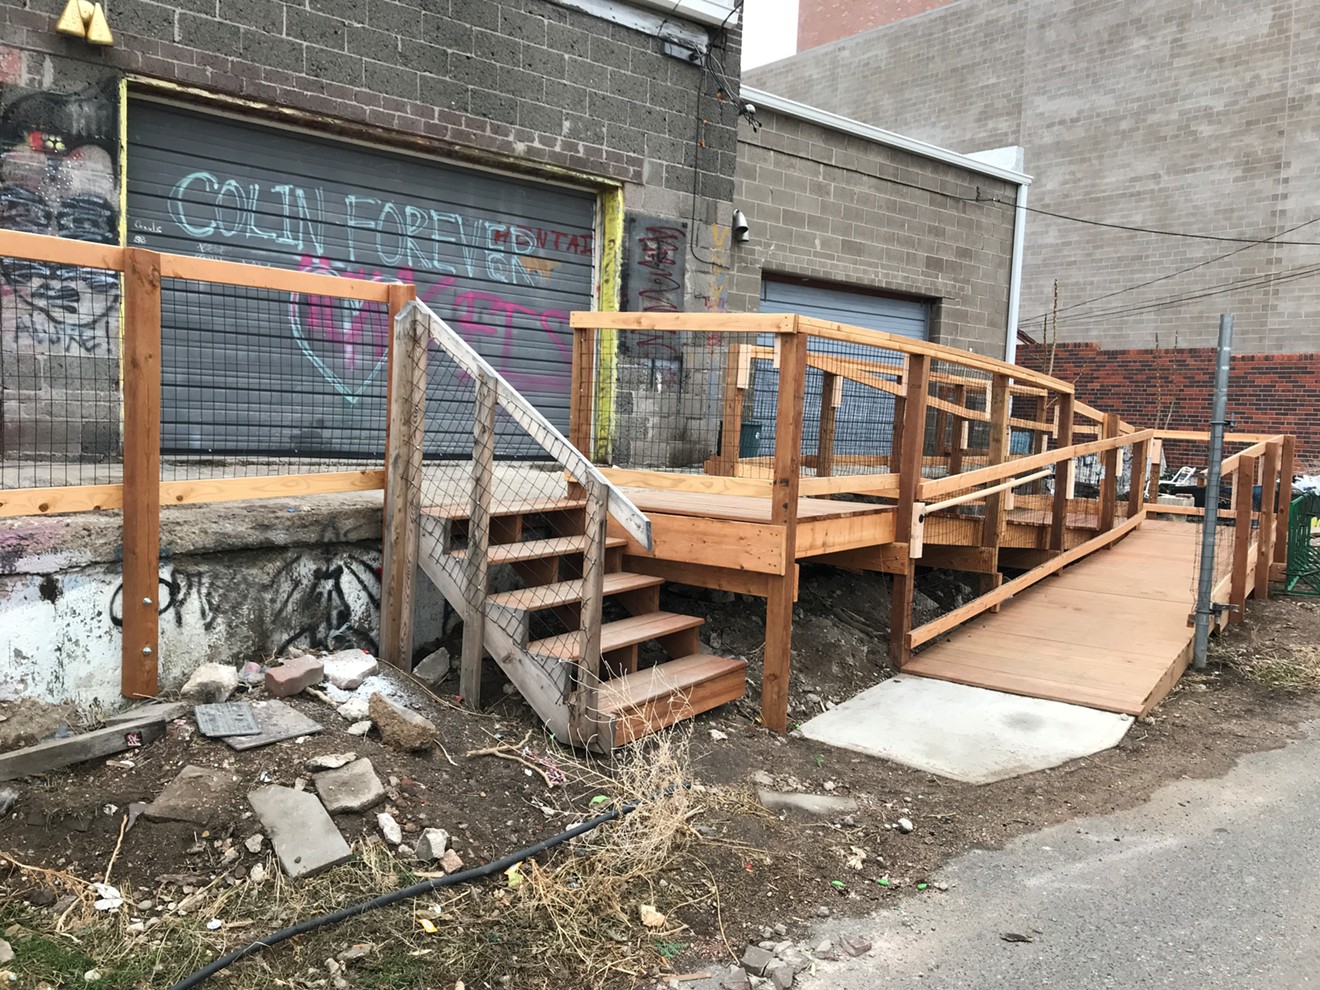 A wheelchair ramp now replaces the old loading dock outside Rhinoceropolis and Glob. A tribute to the late Colin Ward is spray-painted on the garage.